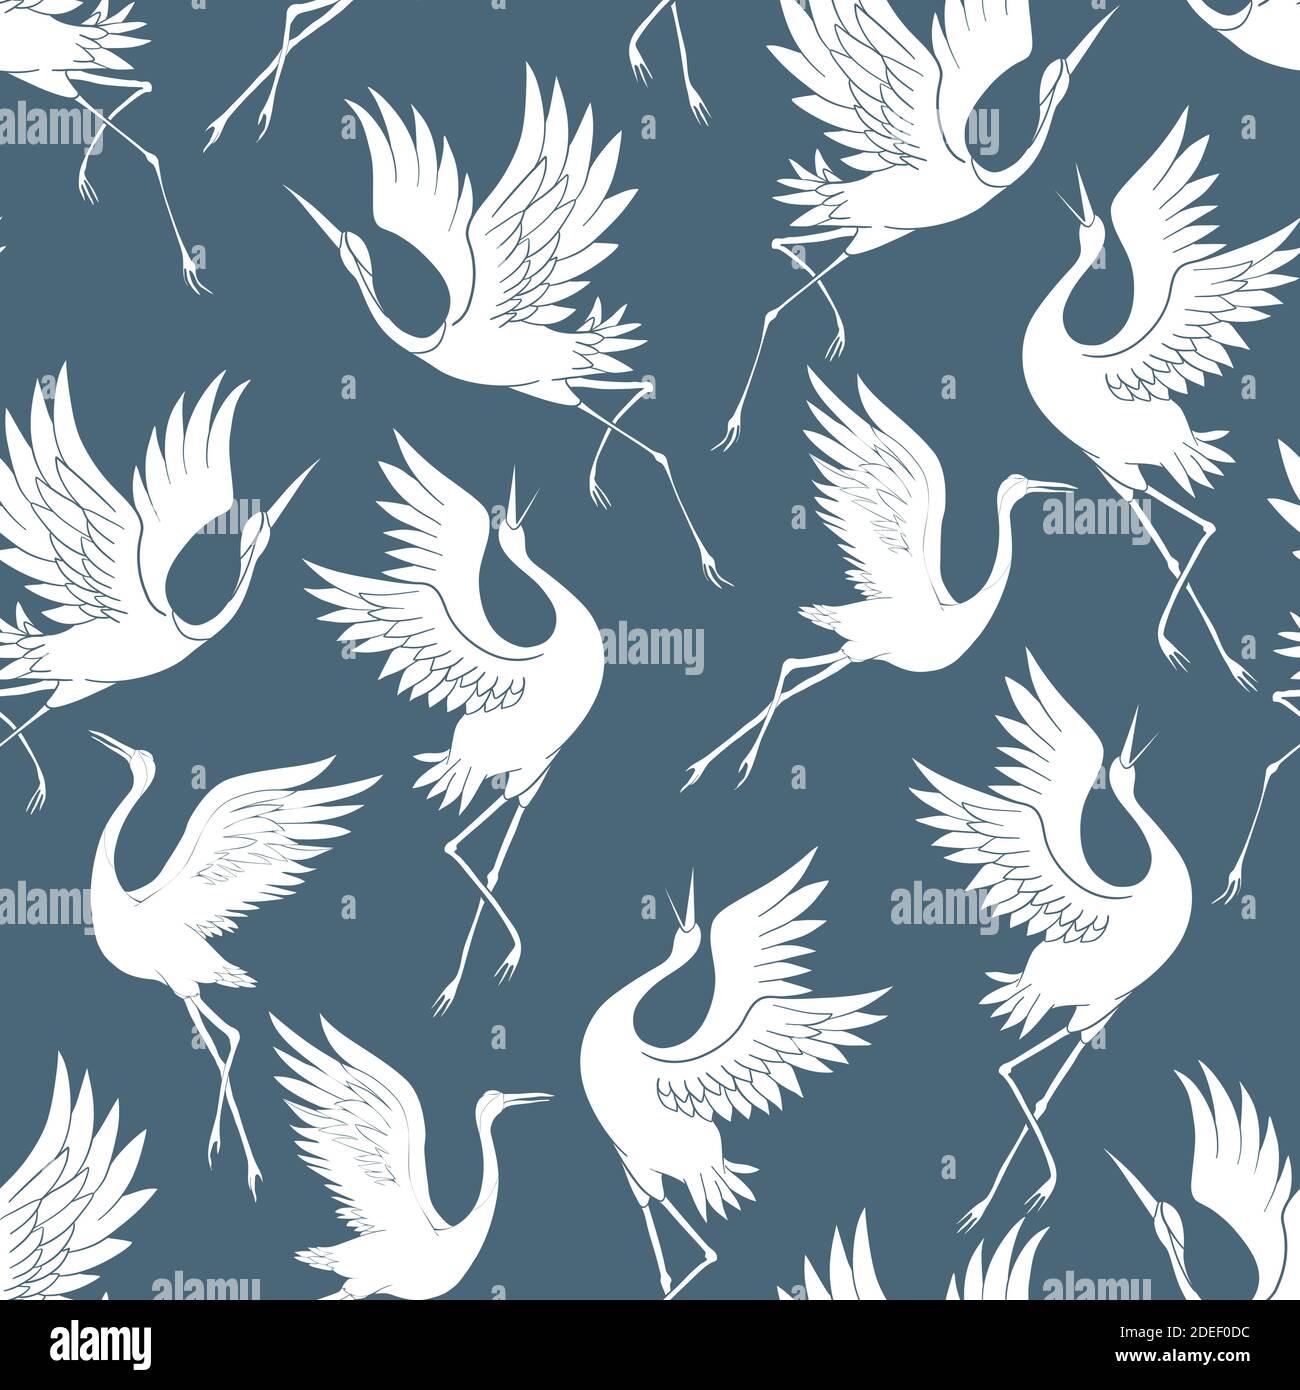 Seamless patterns with Japanese cranes for Your design Stock Vector